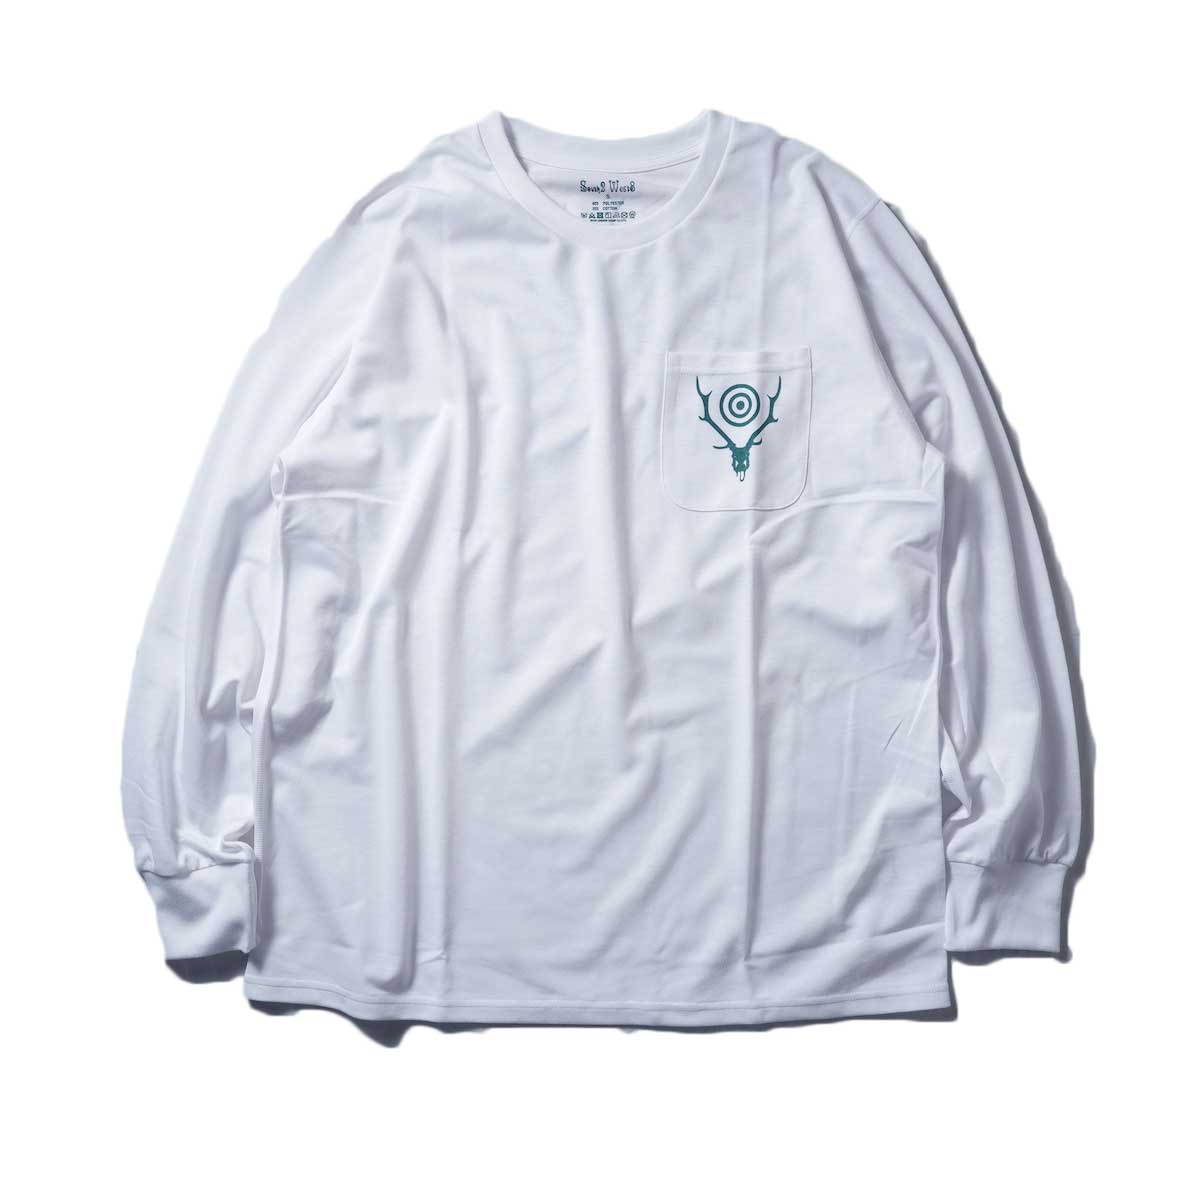 South2 West8 / L/S Round Pocket Tee -Circle Horn (White)正面